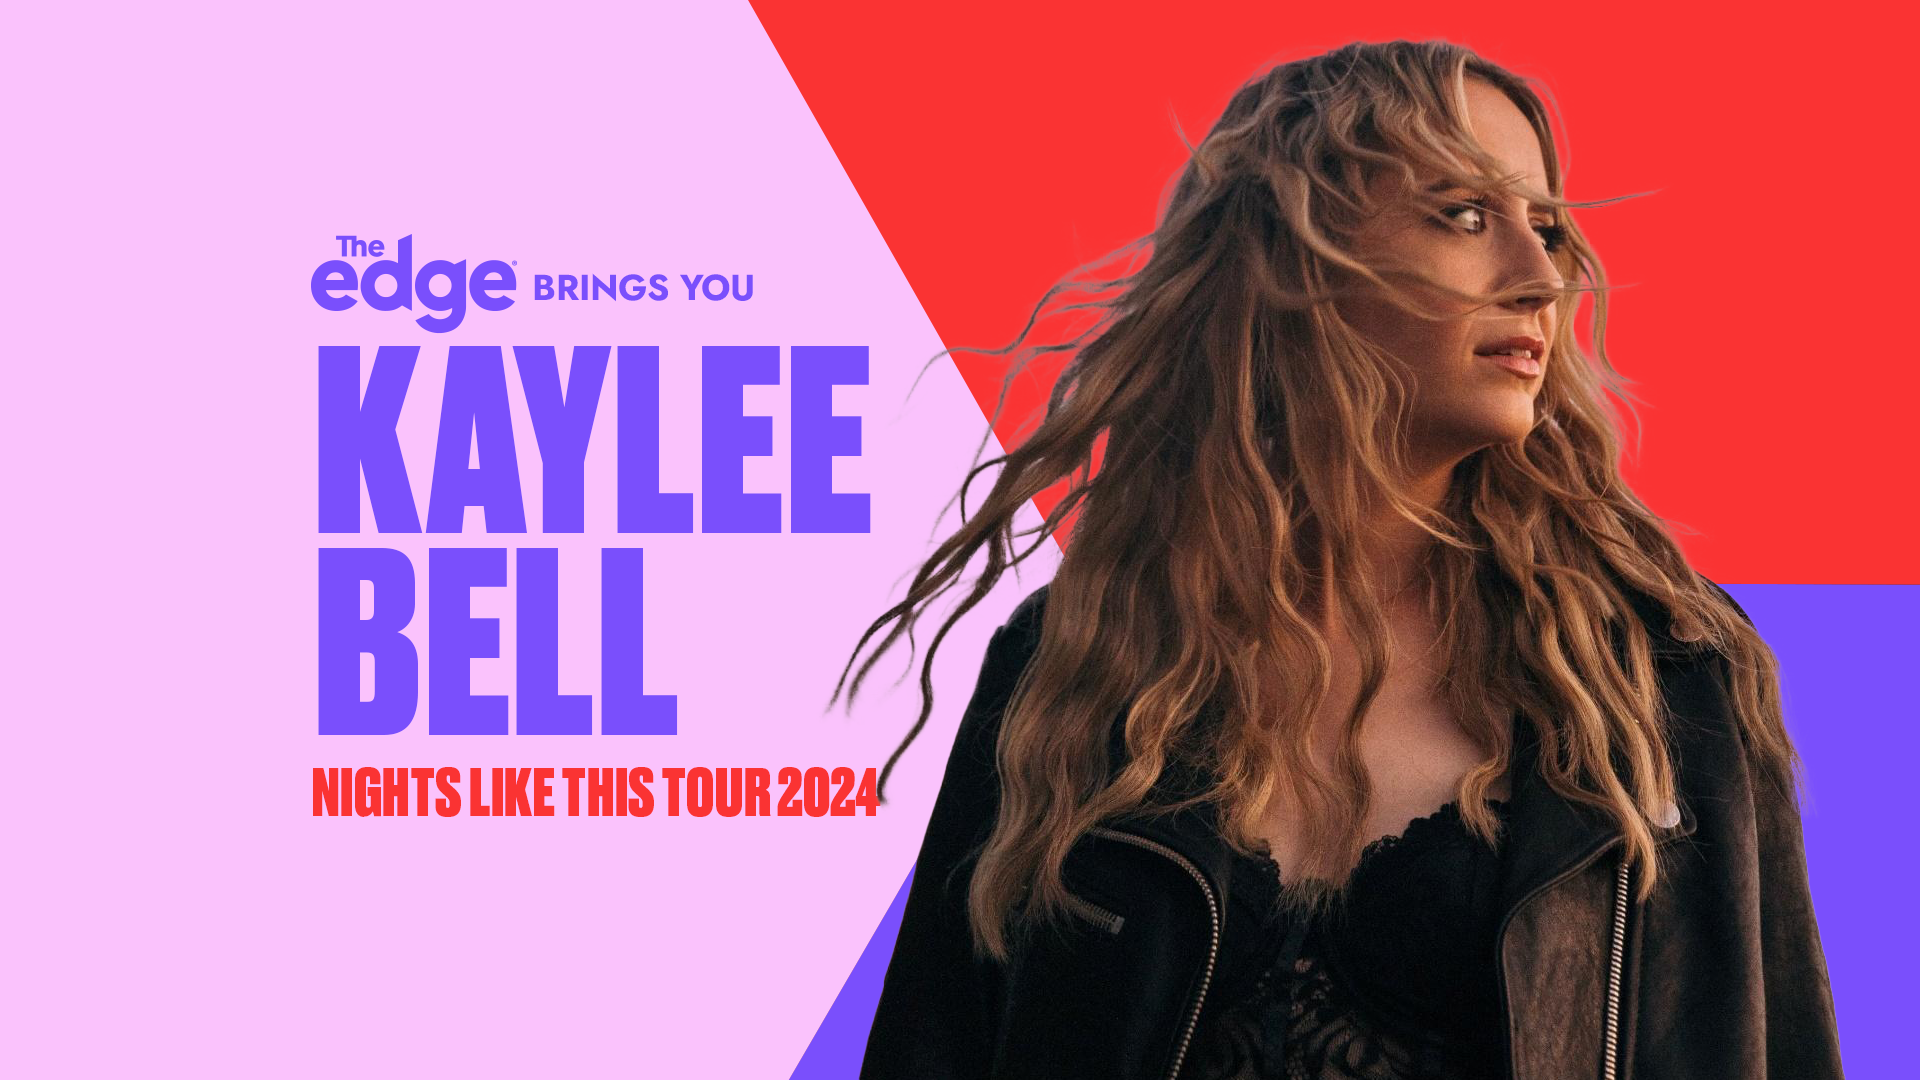 The Edge Brings you Kaylee Bell Nights Like This Tour 2024